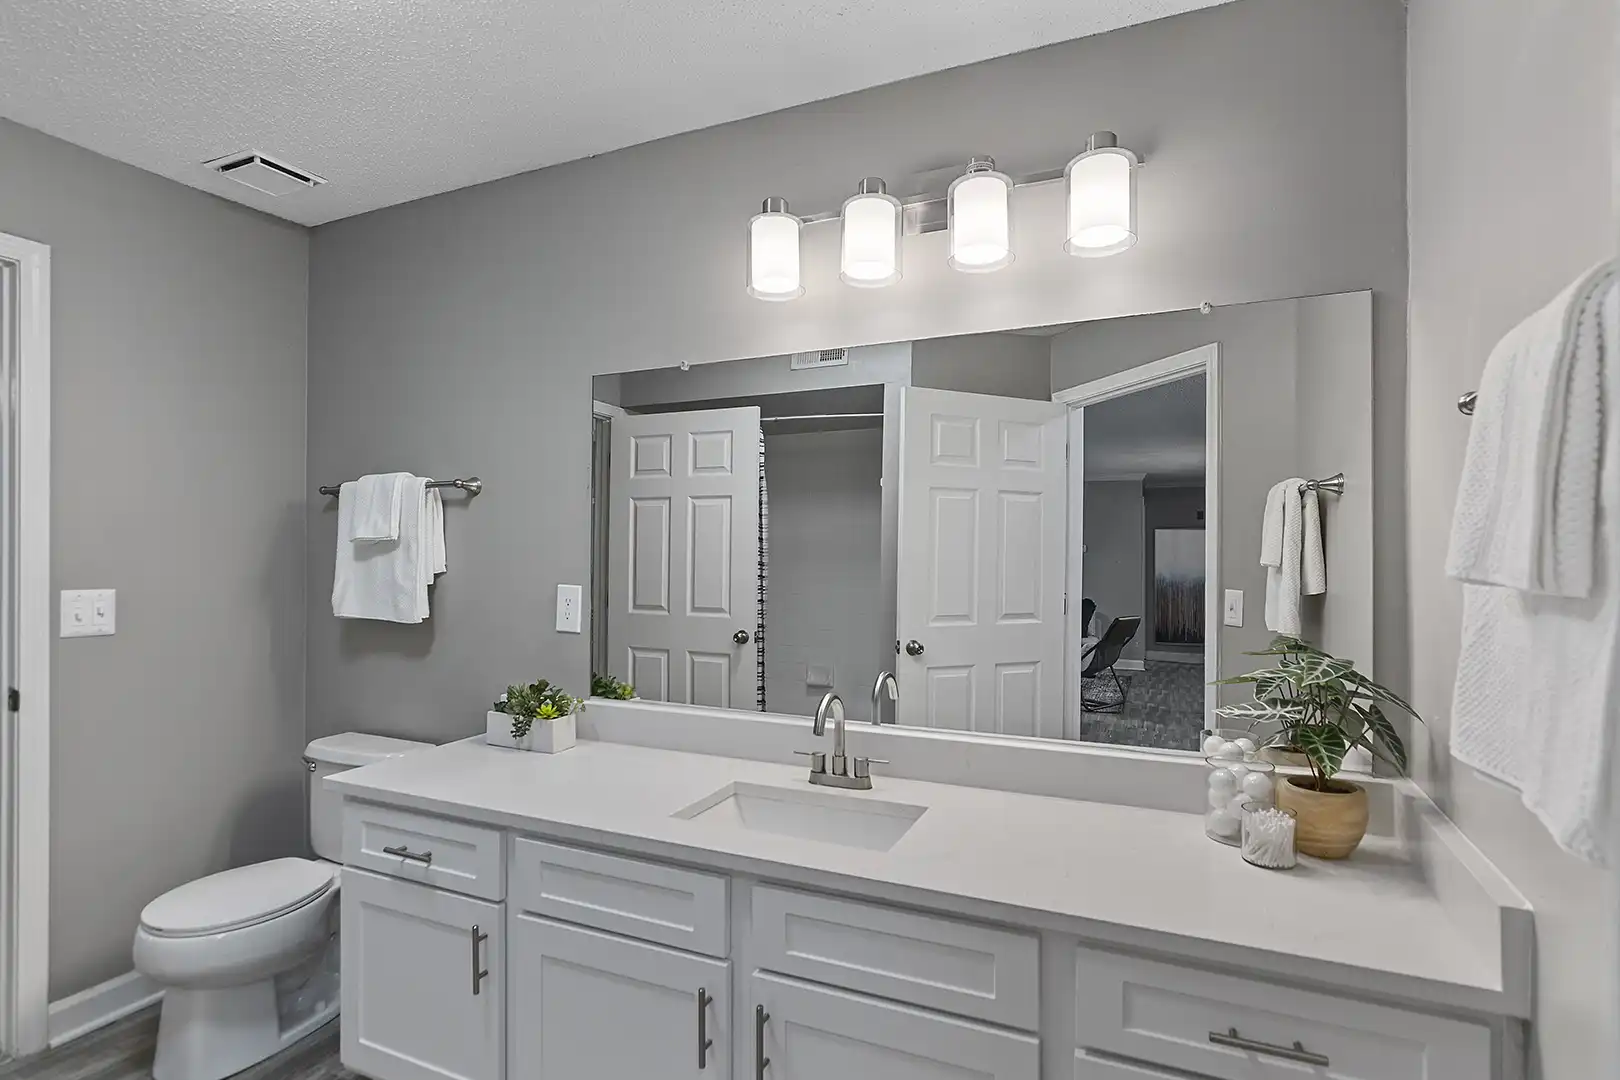 upgraded and modern bathroom with white granite-style countertop